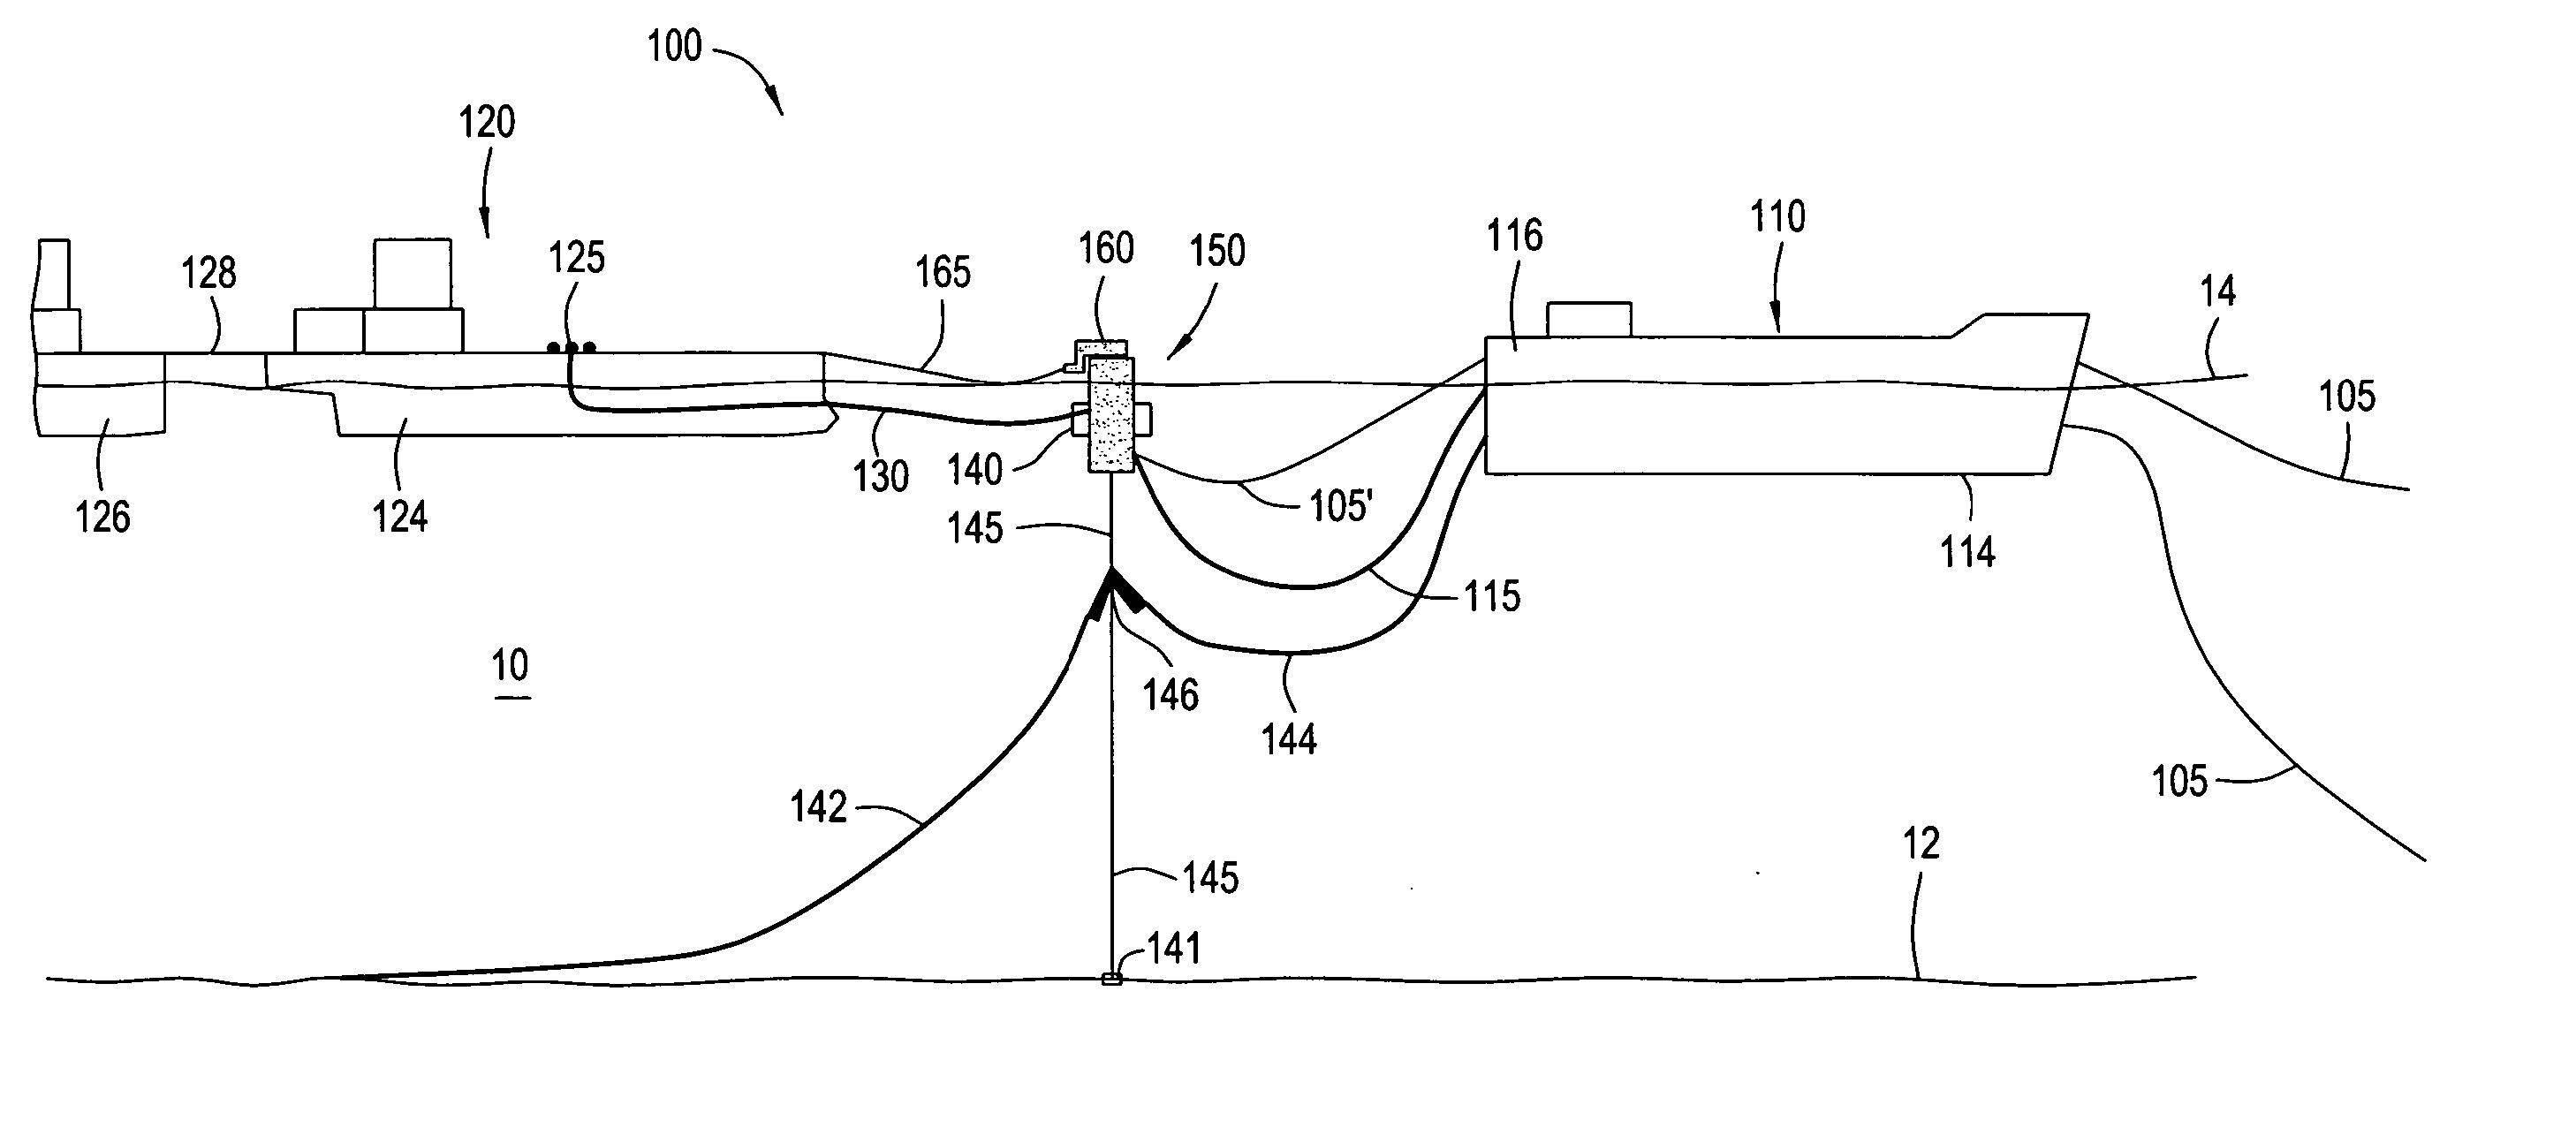 Combined Riser, Offloading and Mooring System